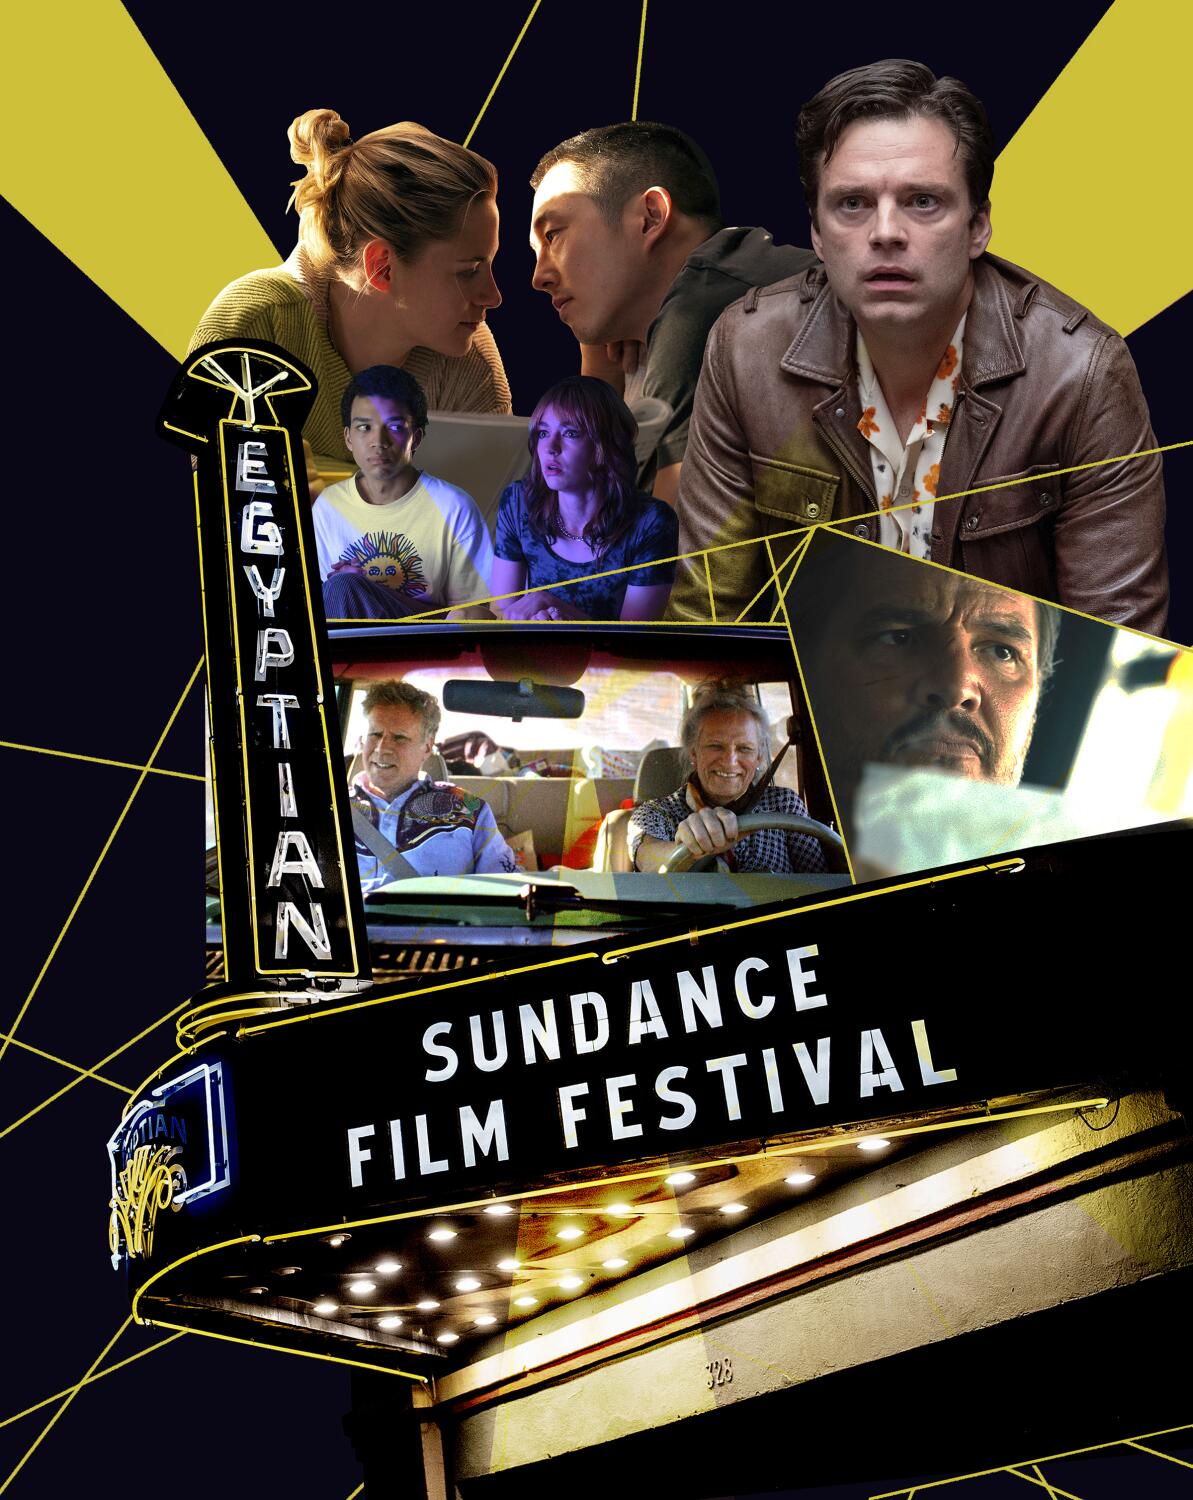 What's going to pop big at Sundance? We have thoughts